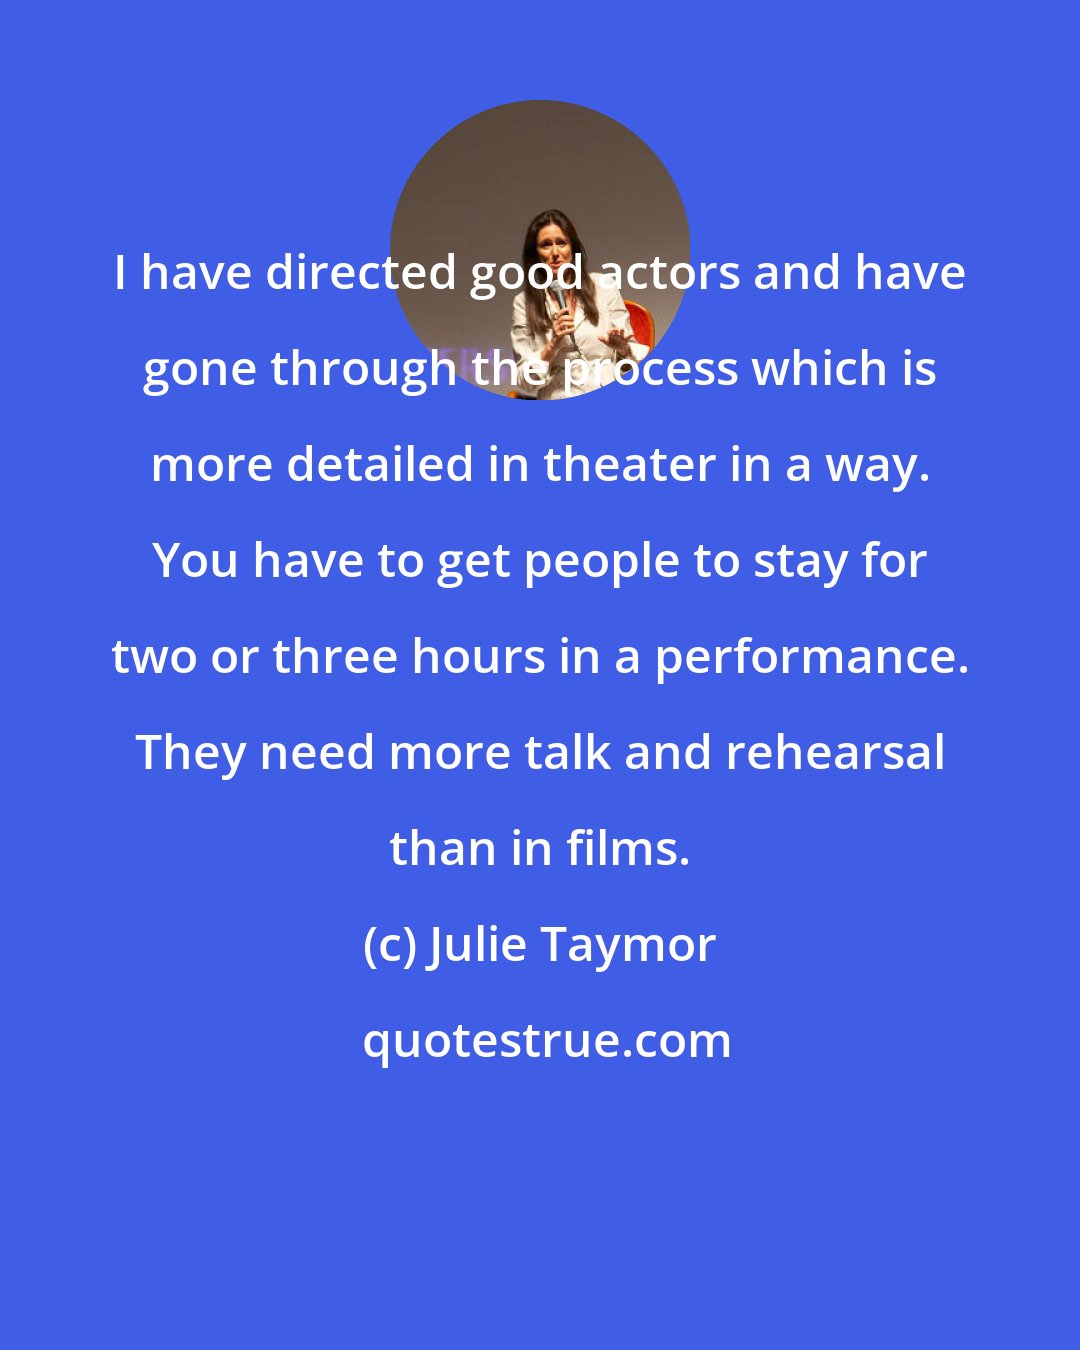 Julie Taymor: I have directed good actors and have gone through the process which is more detailed in theater in a way. You have to get people to stay for two or three hours in a performance. They need more talk and rehearsal than in films.